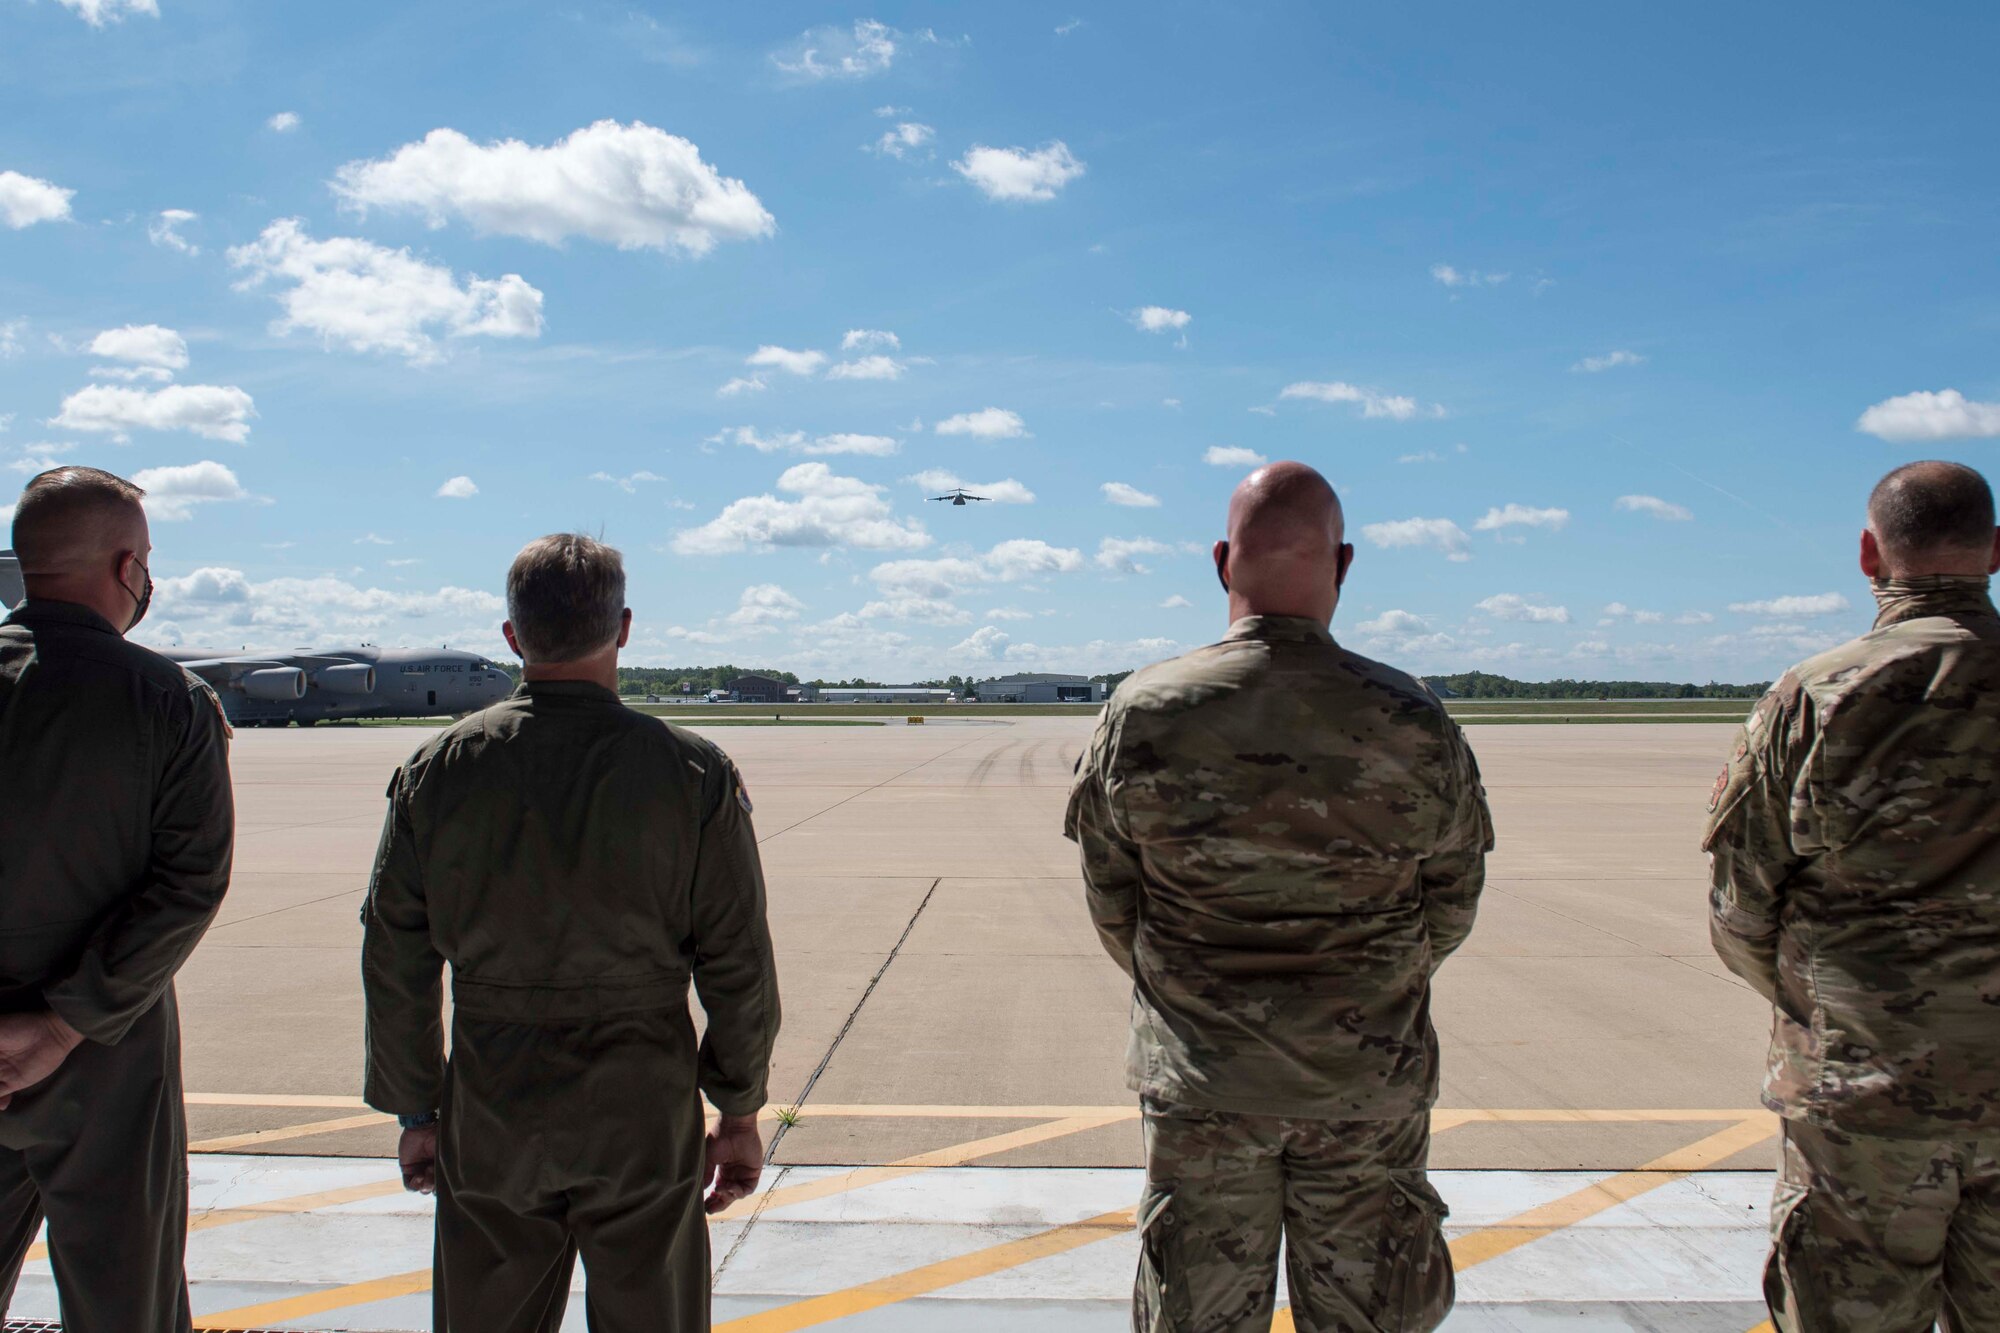 Members of the 167th Airlift Wing watch as a C-17 Globemaster III aircraft approaches Shepherd Field, Martinsburg, West Virginia, for a flyover at the conclusion of the memorial service for Lt. Col. Barry Rowekamp, Aug. 19, 2021. Rowekamp was the wing’s chief of aerospace medicine. (U.S. Air National Guard photo by Senior Master Sgt. Emily Beightol-Deyerle)